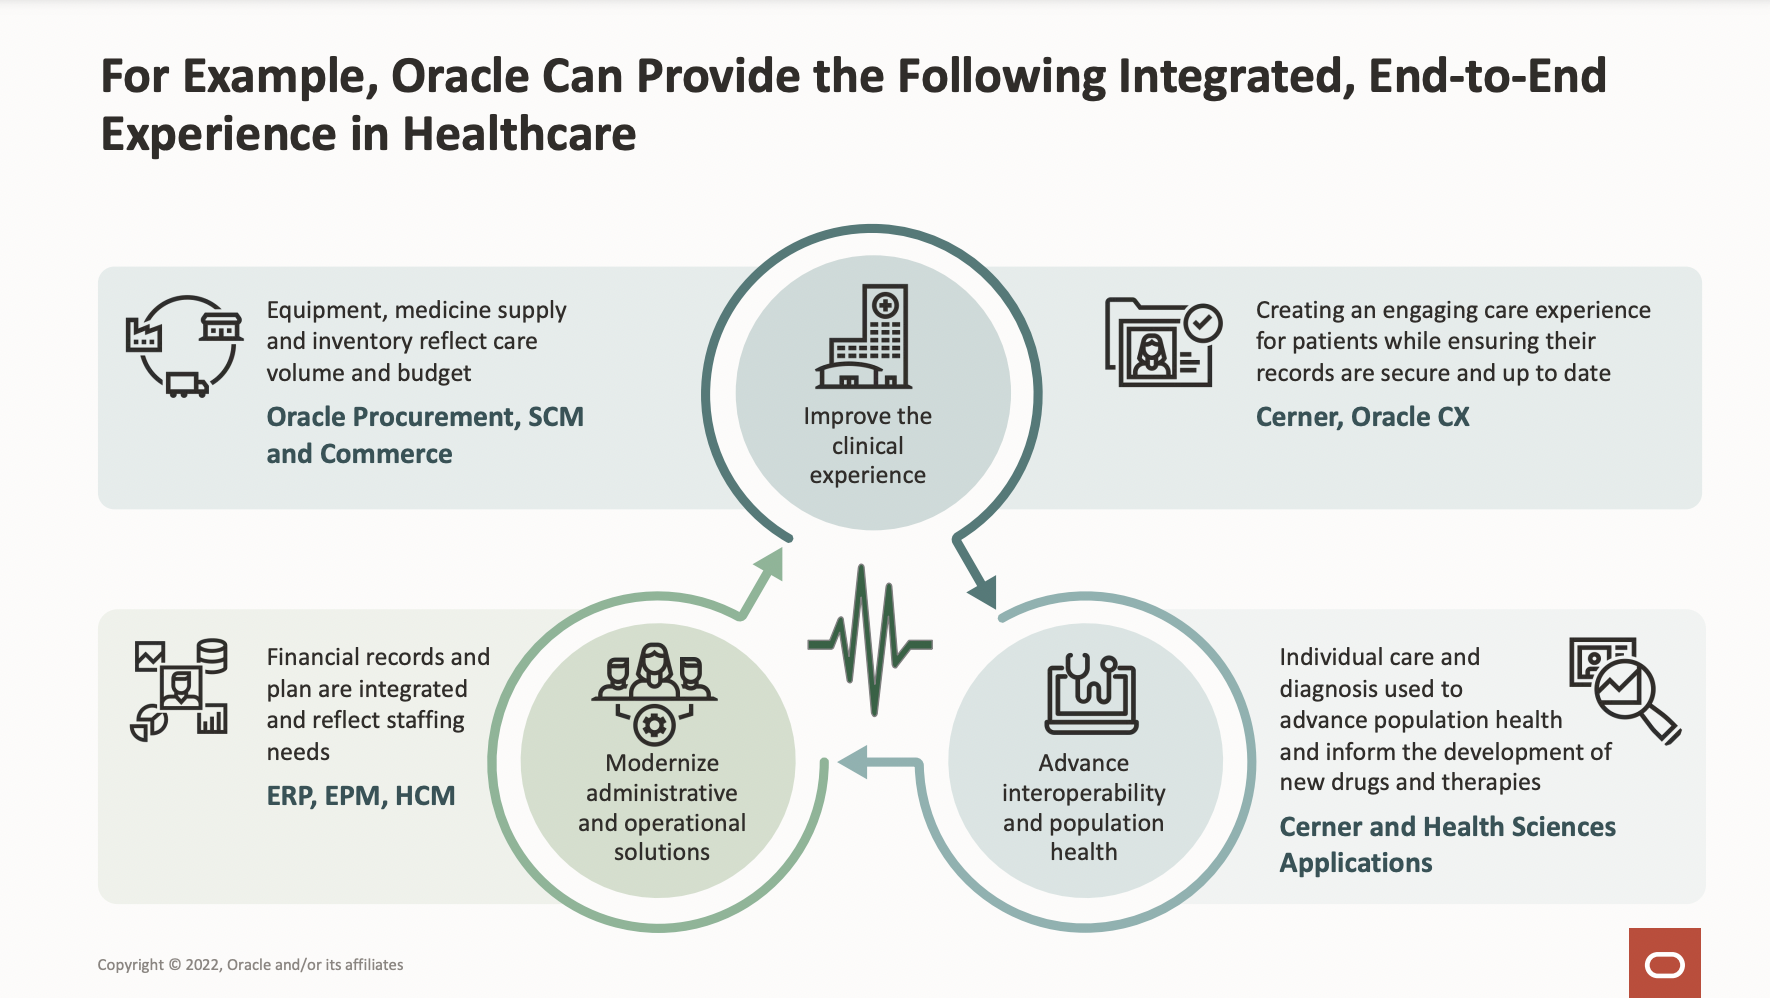 Oracle Can Provide the Following Integrated End-to-End Experience in Healthcare